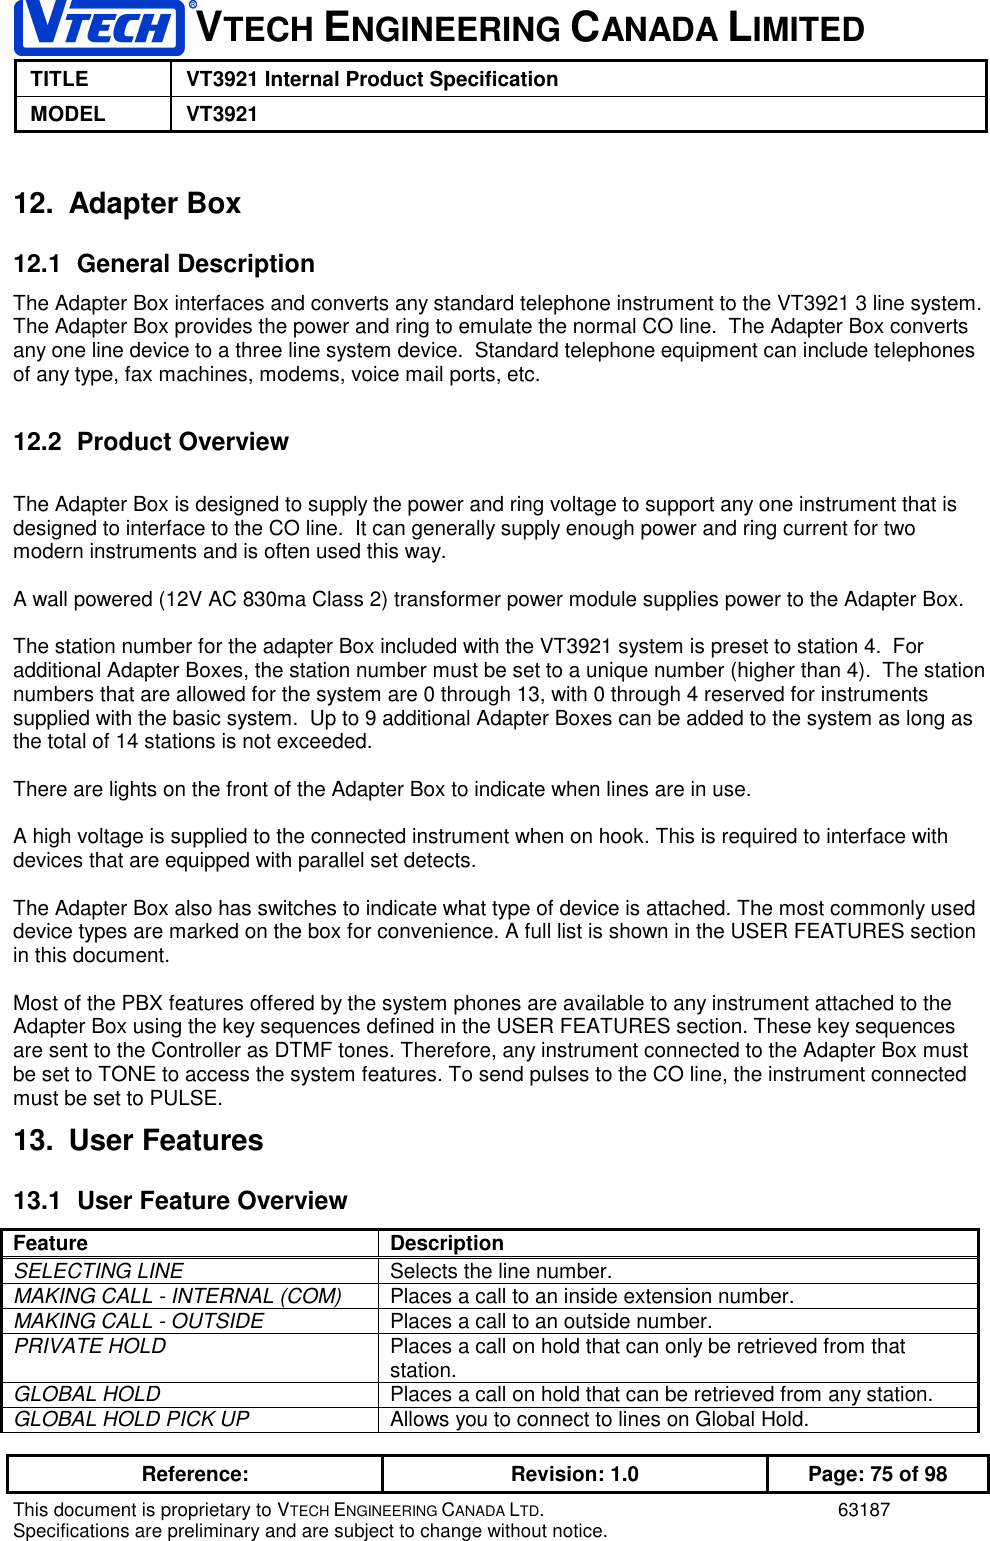 VTECH ENGINEERING CANADA LIMITEDTITLE VT3921 Internal Product SpecificationMODEL VT3921Reference: Revision: 1.0 Page: 75 of 98This document is proprietary to VTECH ENGINEERING CANADA LTD. 63187Specifications are preliminary and are subject to change without notice.12. Adapter Box12.1 General DescriptionThe Adapter Box interfaces and converts any standard telephone instrument to the VT3921 3 line system.The Adapter Box provides the power and ring to emulate the normal CO line.  The Adapter Box convertsany one line device to a three line system device.  Standard telephone equipment can include telephonesof any type, fax machines, modems, voice mail ports, etc.12.2 Product OverviewThe Adapter Box is designed to supply the power and ring voltage to support any one instrument that isdesigned to interface to the CO line.  It can generally supply enough power and ring current for twomodern instruments and is often used this way.A wall powered (12V AC 830ma Class 2) transformer power module supplies power to the Adapter Box.The station number for the adapter Box included with the VT3921 system is preset to station 4.  Foradditional Adapter Boxes, the station number must be set to a unique number (higher than 4).  The stationnumbers that are allowed for the system are 0 through 13, with 0 through 4 reserved for instrumentssupplied with the basic system.  Up to 9 additional Adapter Boxes can be added to the system as long asthe total of 14 stations is not exceeded.There are lights on the front of the Adapter Box to indicate when lines are in use.A high voltage is supplied to the connected instrument when on hook. This is required to interface withdevices that are equipped with parallel set detects.The Adapter Box also has switches to indicate what type of device is attached. The most commonly useddevice types are marked on the box for convenience. A full list is shown in the USER FEATURES sectionin this document.Most of the PBX features offered by the system phones are available to any instrument attached to theAdapter Box using the key sequences defined in the USER FEATURES section. These key sequencesare sent to the Controller as DTMF tones. Therefore, any instrument connected to the Adapter Box mustbe set to TONE to access the system features. To send pulses to the CO line, the instrument connectedmust be set to PULSE.13. User Features13.1  User Feature OverviewFeature DescriptionSELECTING LINE Selects the line number.MAKING CALL - INTERNAL (COM) Places a call to an inside extension number.MAKING CALL - OUTSIDE Places a call to an outside number.PRIVATE HOLD Places a call on hold that can only be retrieved from thatstation.GLOBAL HOLD Places a call on hold that can be retrieved from any station.GLOBAL HOLD PICK UP Allows you to connect to lines on Global Hold.